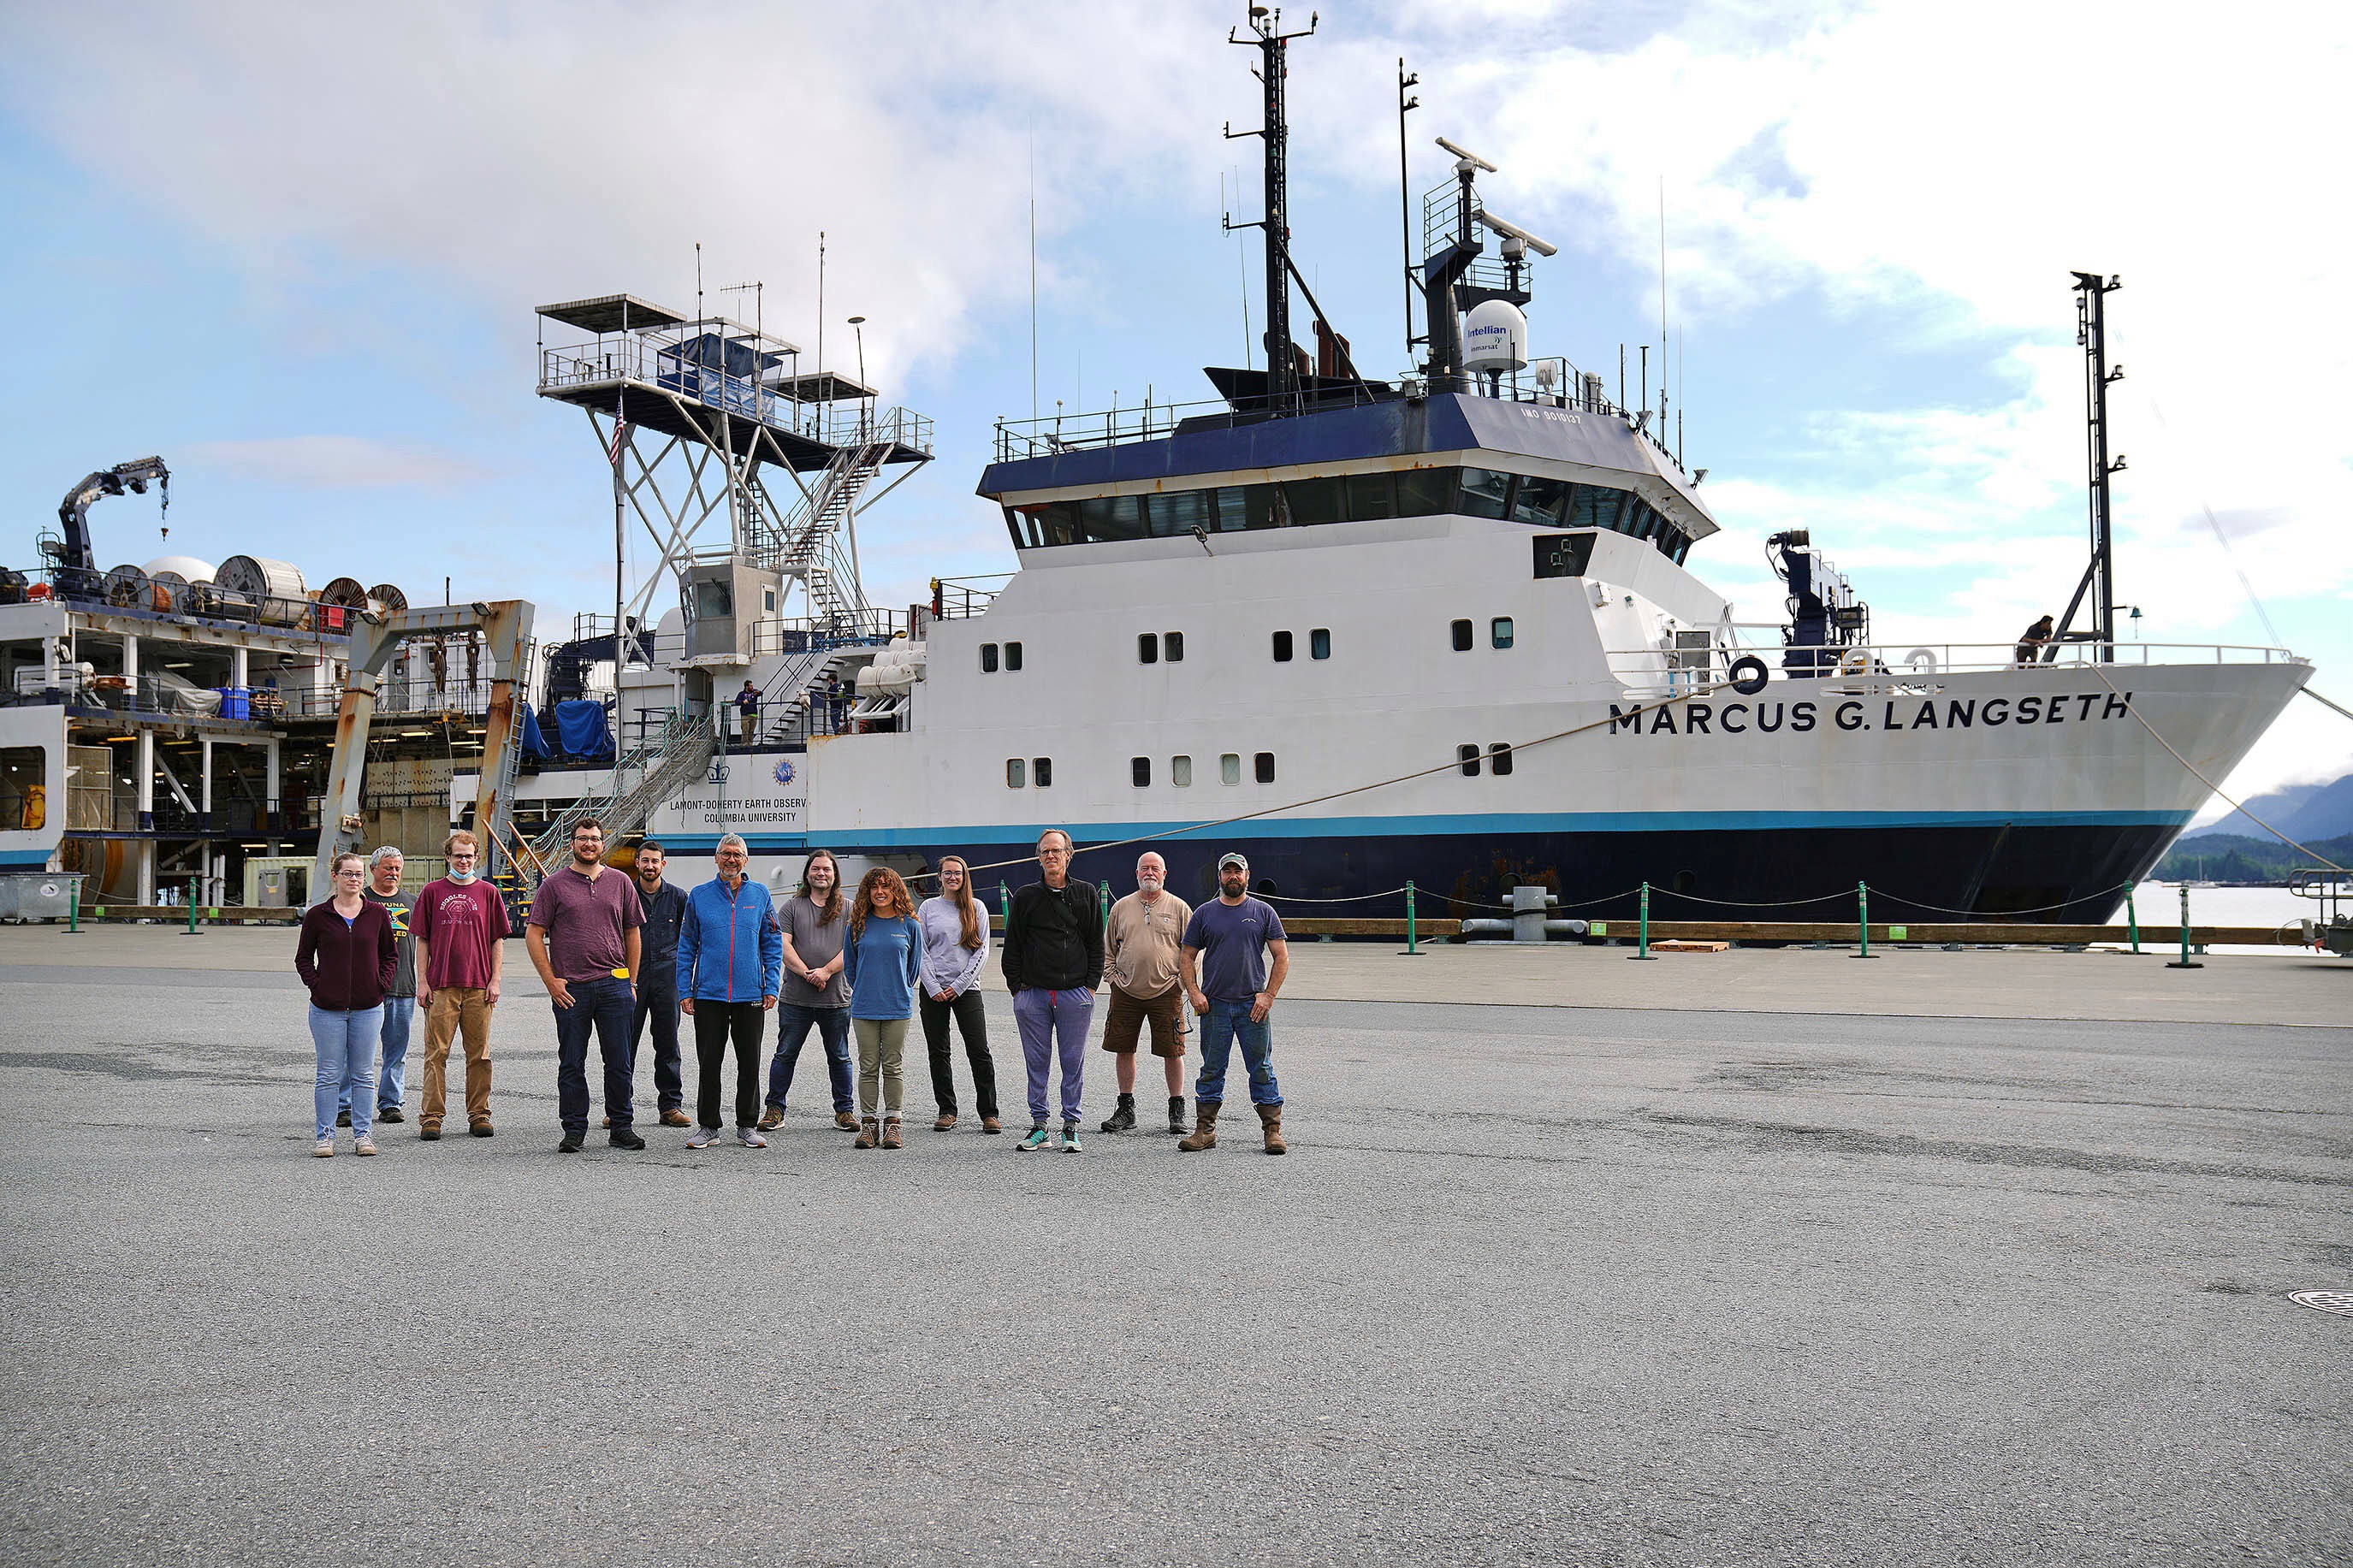 Science team and technical team in front of the Marcus G. Langseth. Pictured: Andrew Barclay, Pete Liljegren, Hannah Brewer, Chris Carchedi, Geena Littel (UBC EOAS), Katie Bosman, Charlie Kleindins, Josh Kassinger, Todd Jensvol, Michael Bostock (UBC EOAS), and Mladen Nedimovic (Dalhousie University). A team of ocean bottom sensor technicians are also on board. Credit: Dustin Safranek